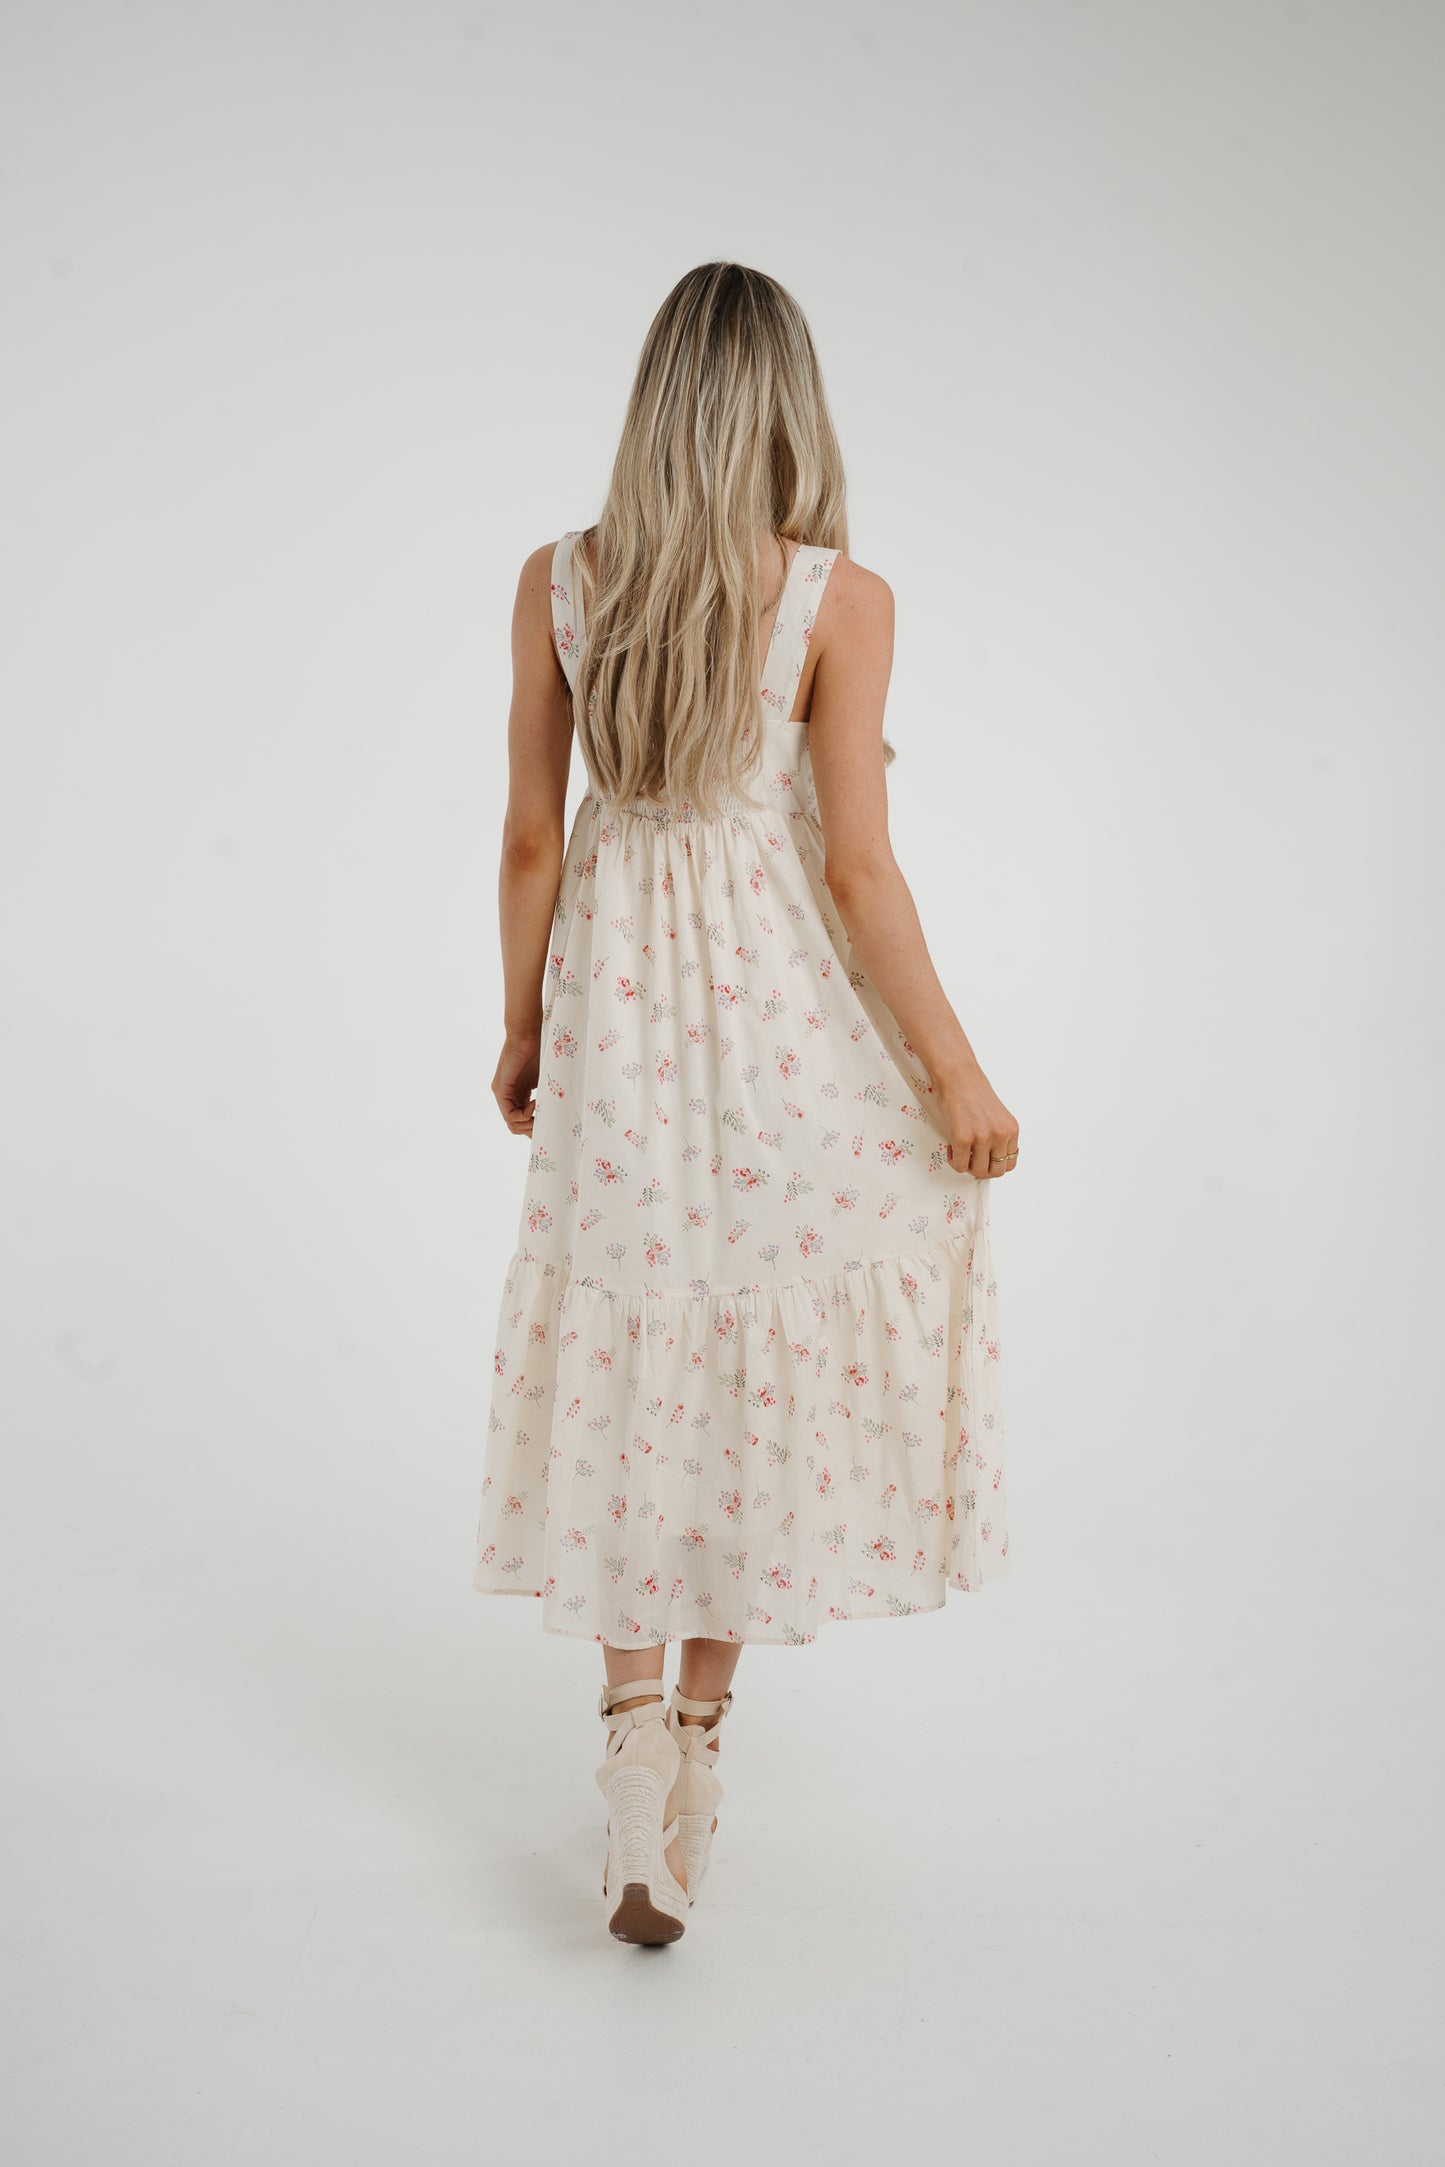 Daisy Pink Floral Dress In Cream